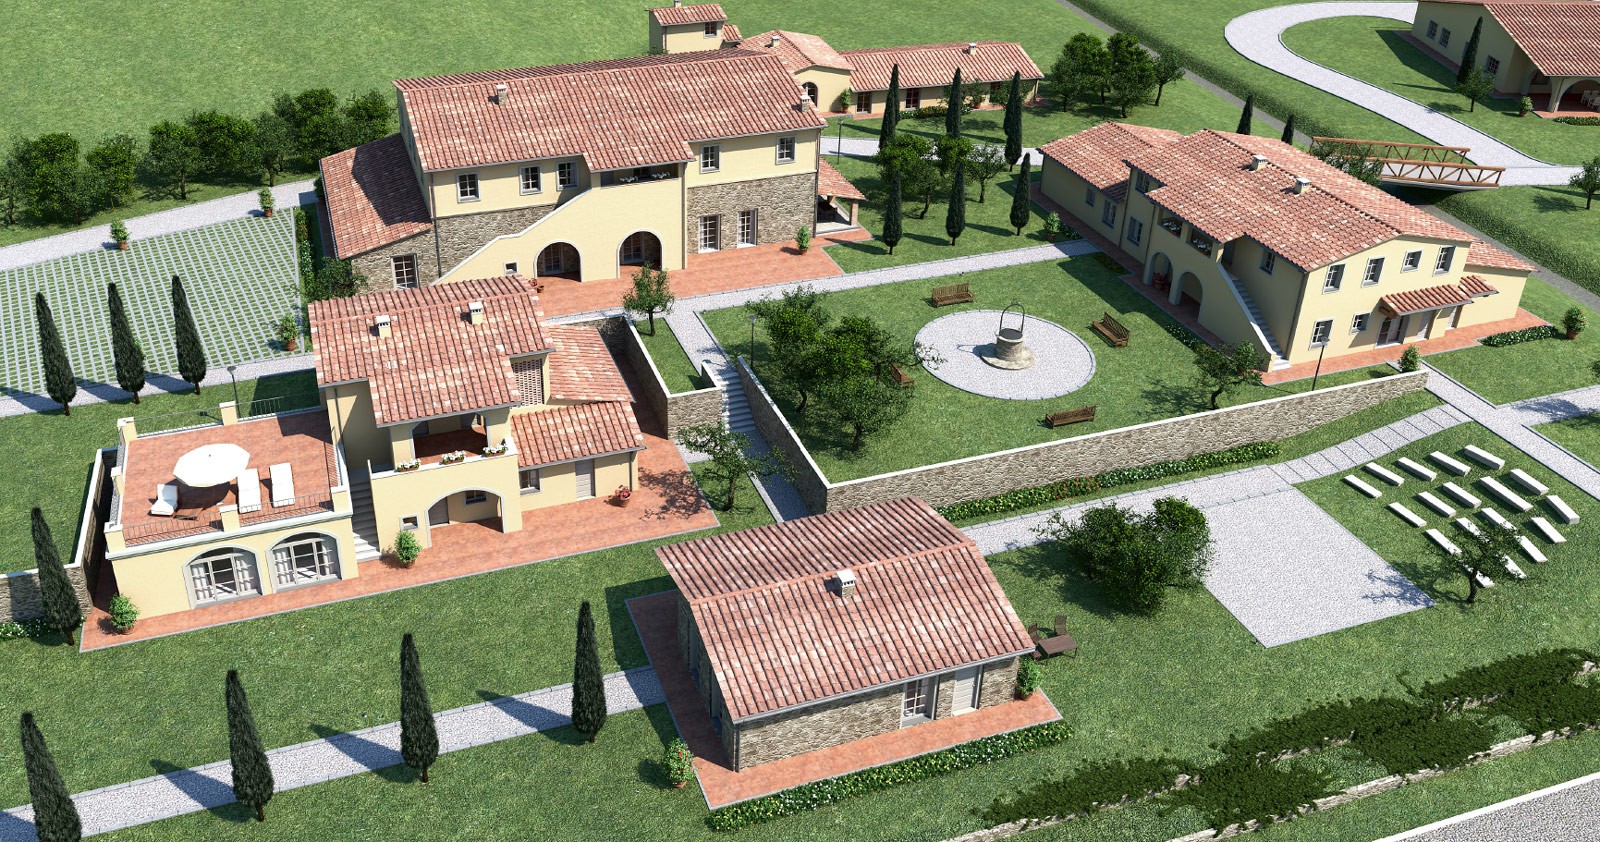 For sale real estate transaction in quiet zone Volterra Toscana